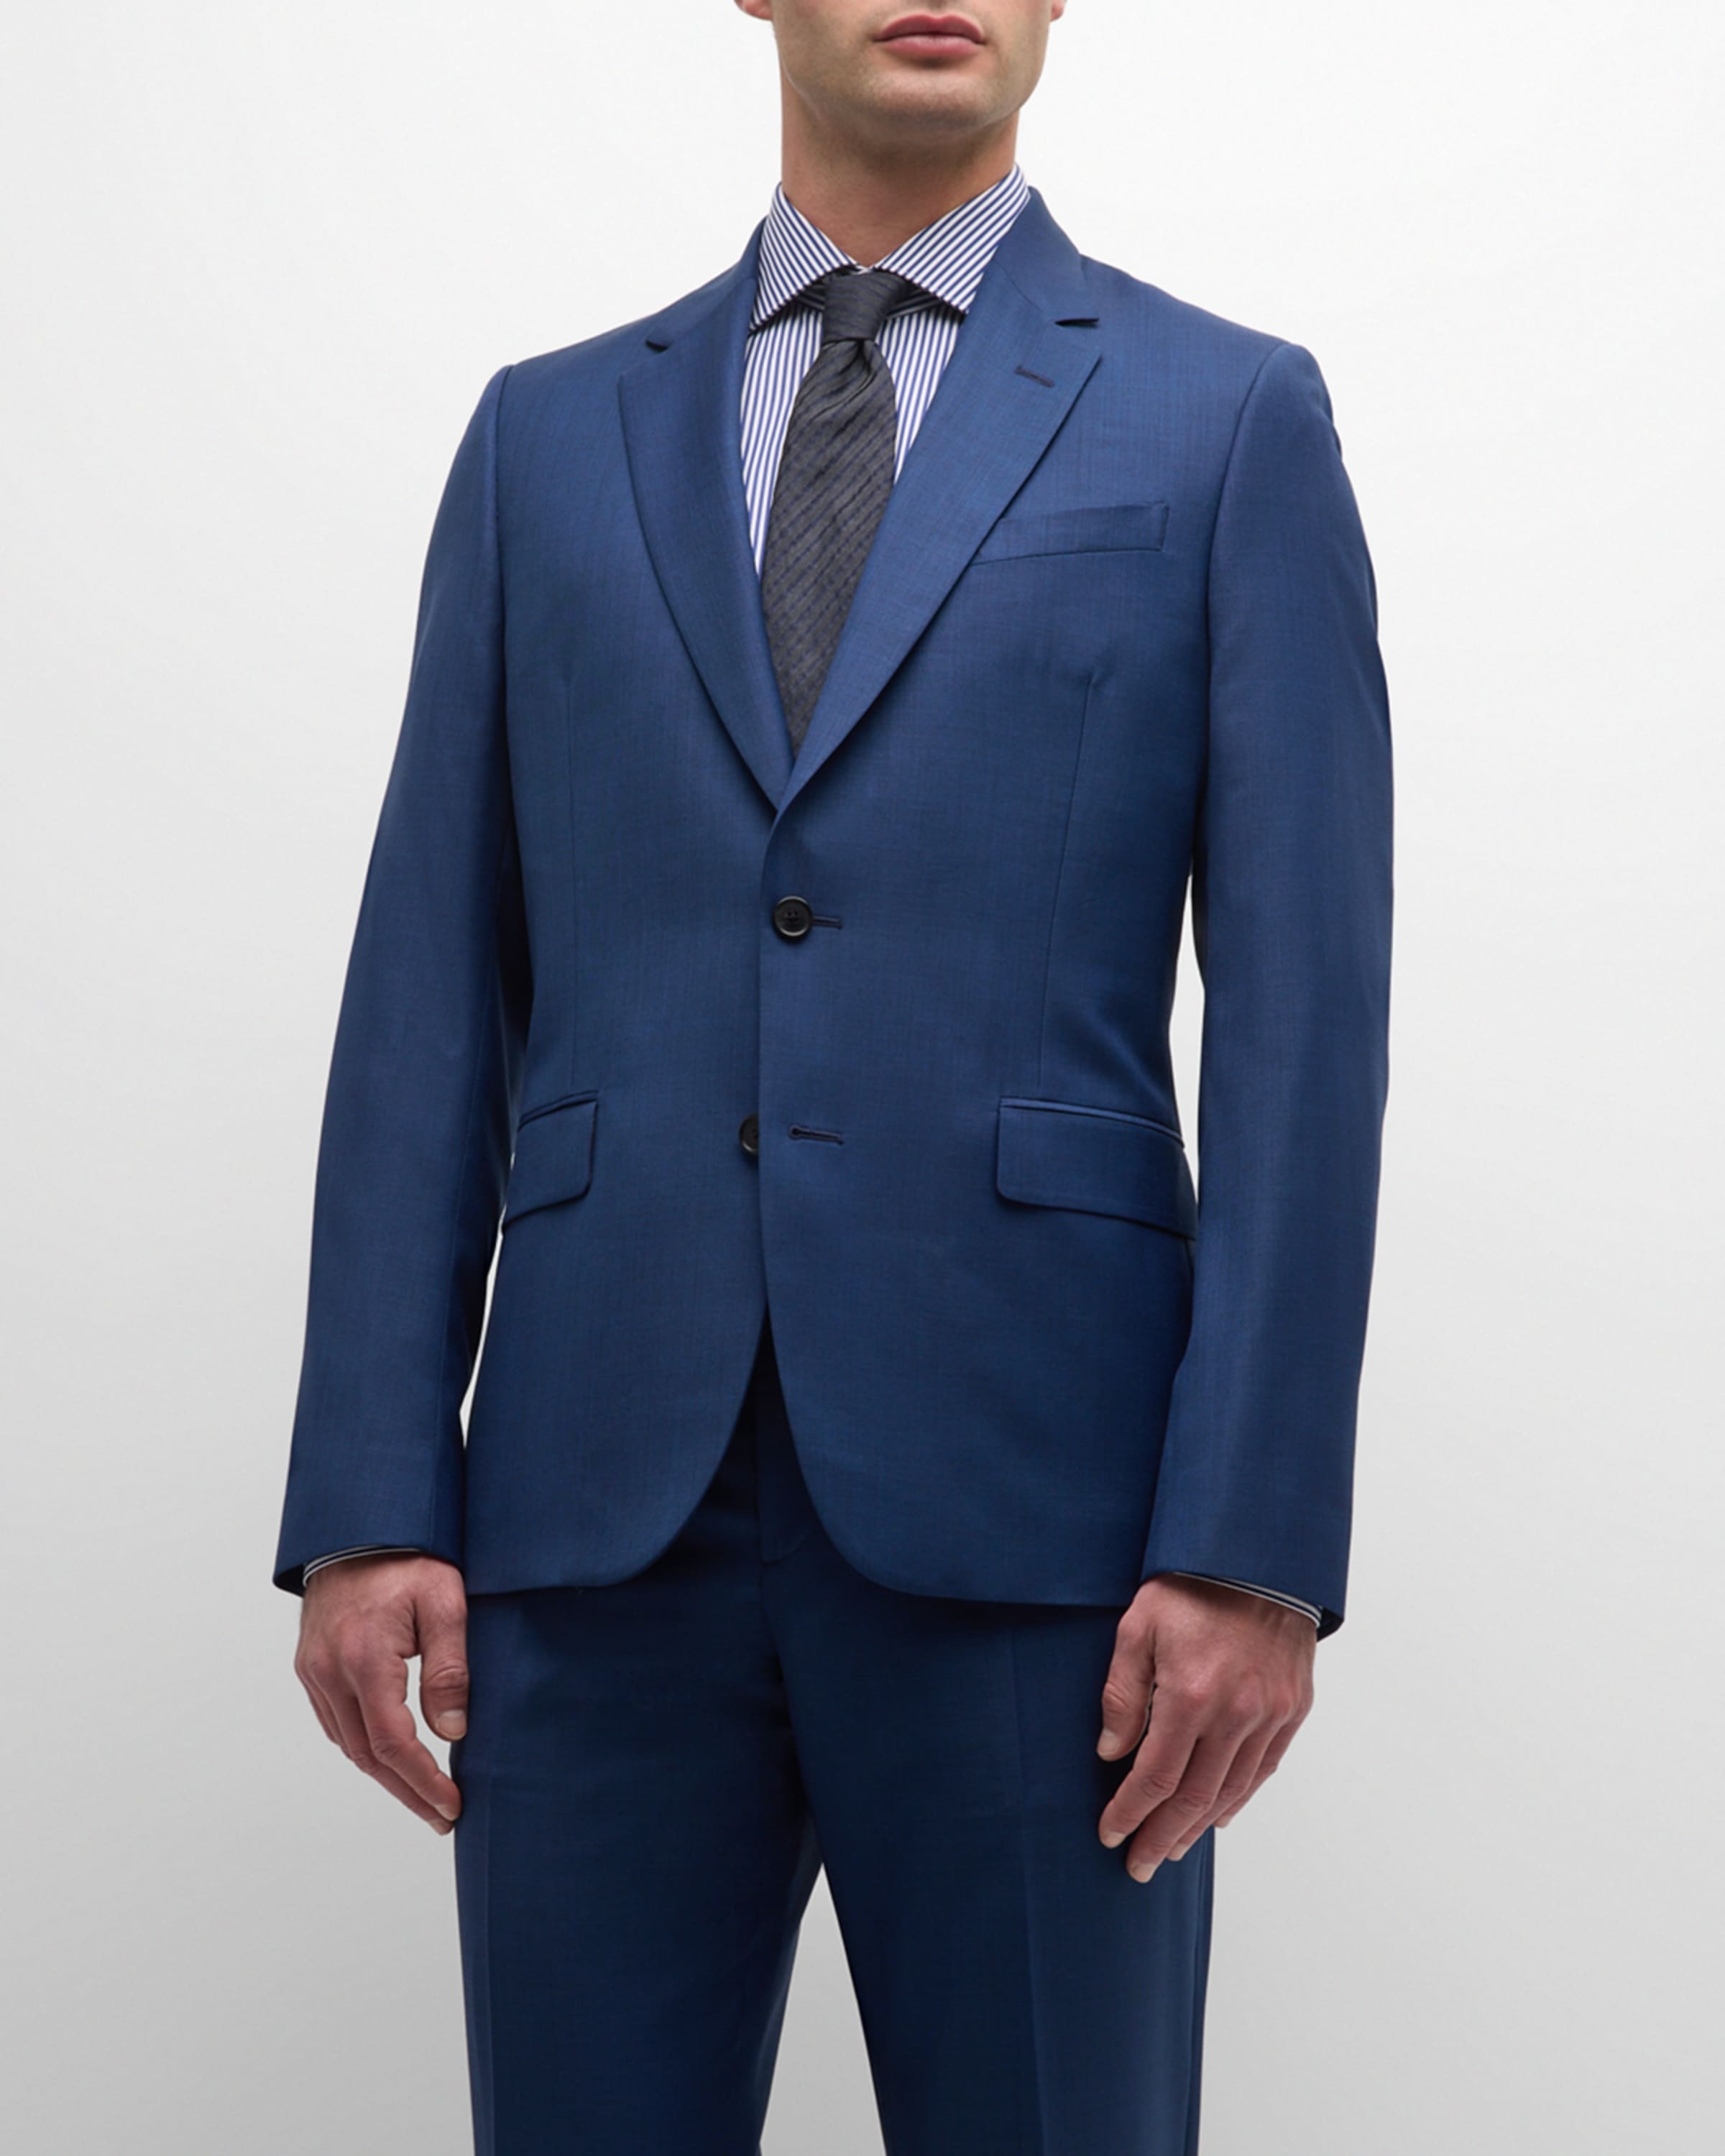 Men's Tailored Fit Wool Two-Button Suit - 3